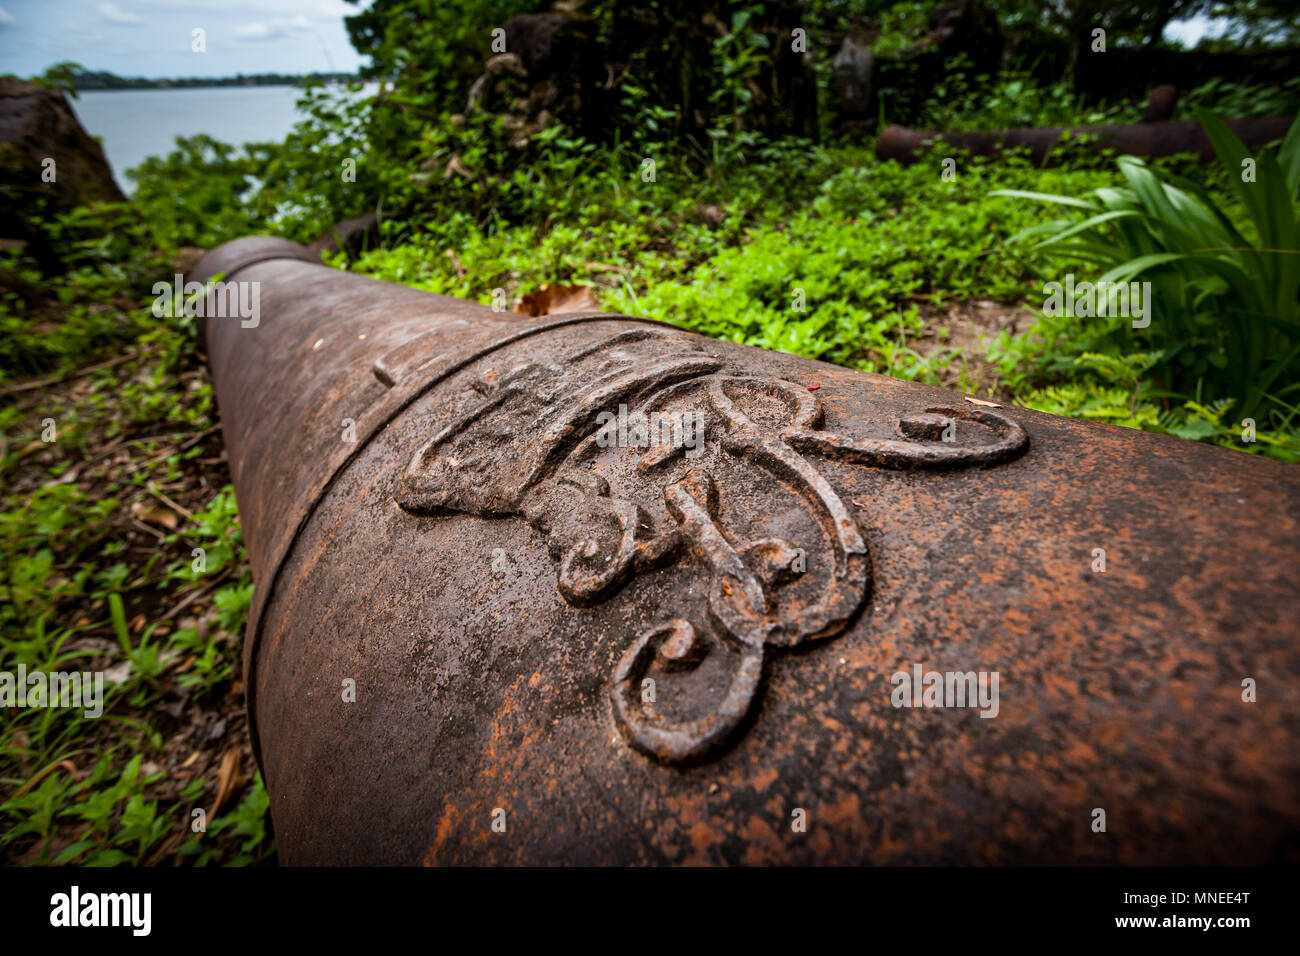 Bunce Island, Sierra Leone - June 02, 2013: West Africa, Bunce Island was a British slave trading post in the 18th century. From its shores, tens of t Stock Photo